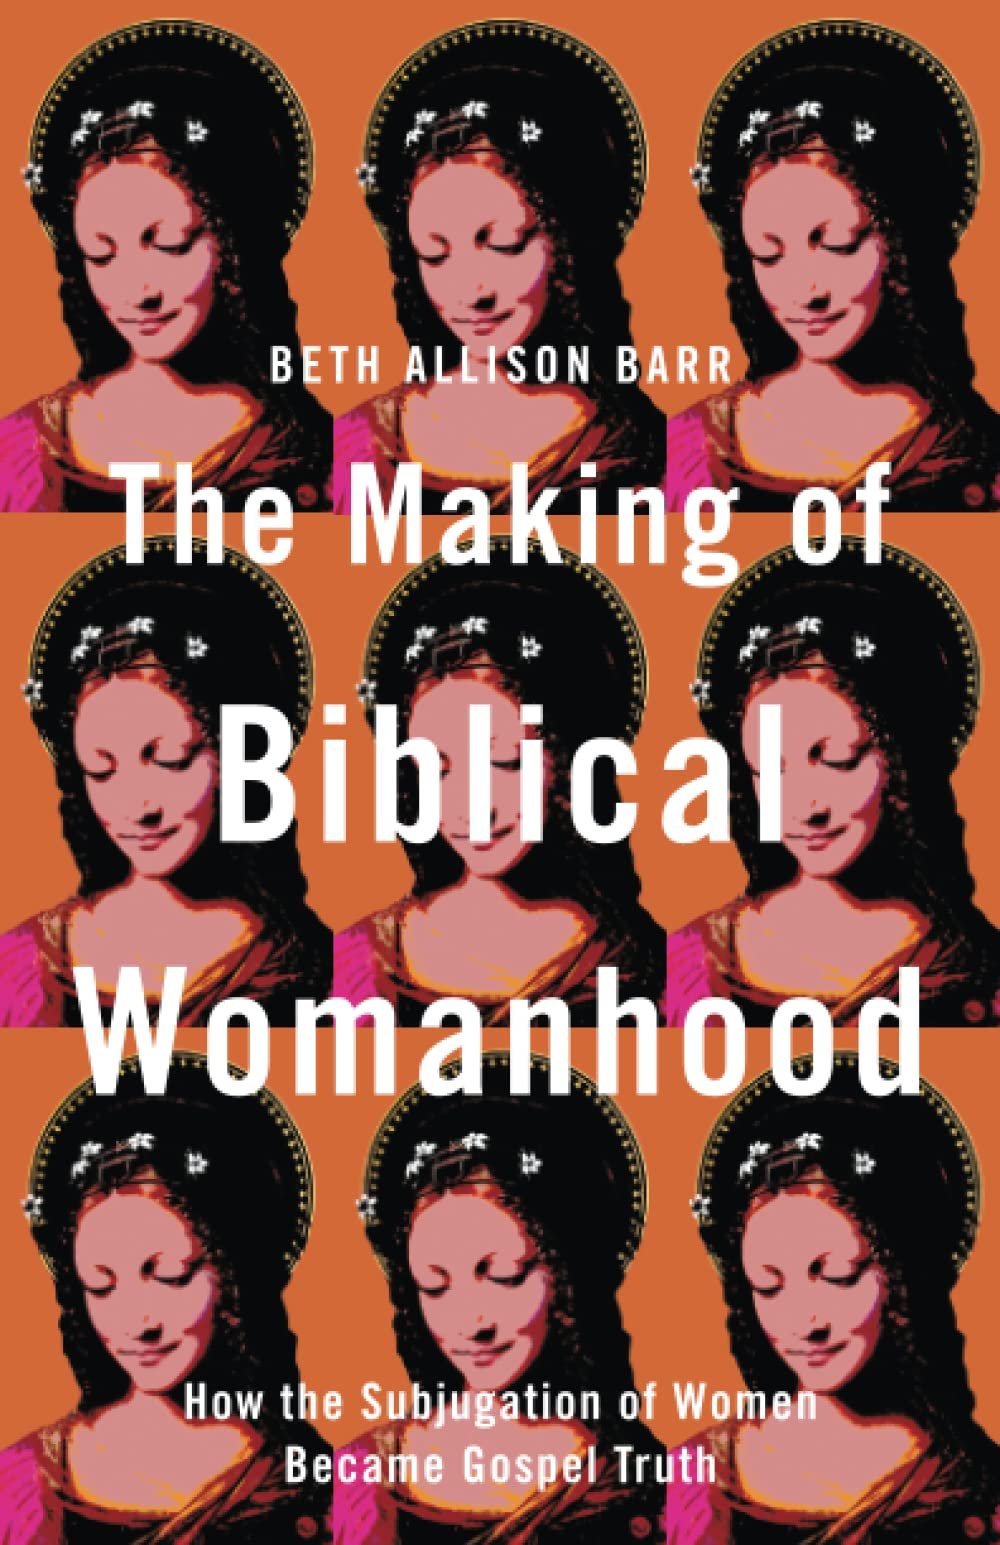  This book walks us through the outstanding figures, clergy, and laywomen who made their mark on the history of the Western Church, showing us the backlash women faced in taking leadership roles and gaining independence. This is an excellent book for